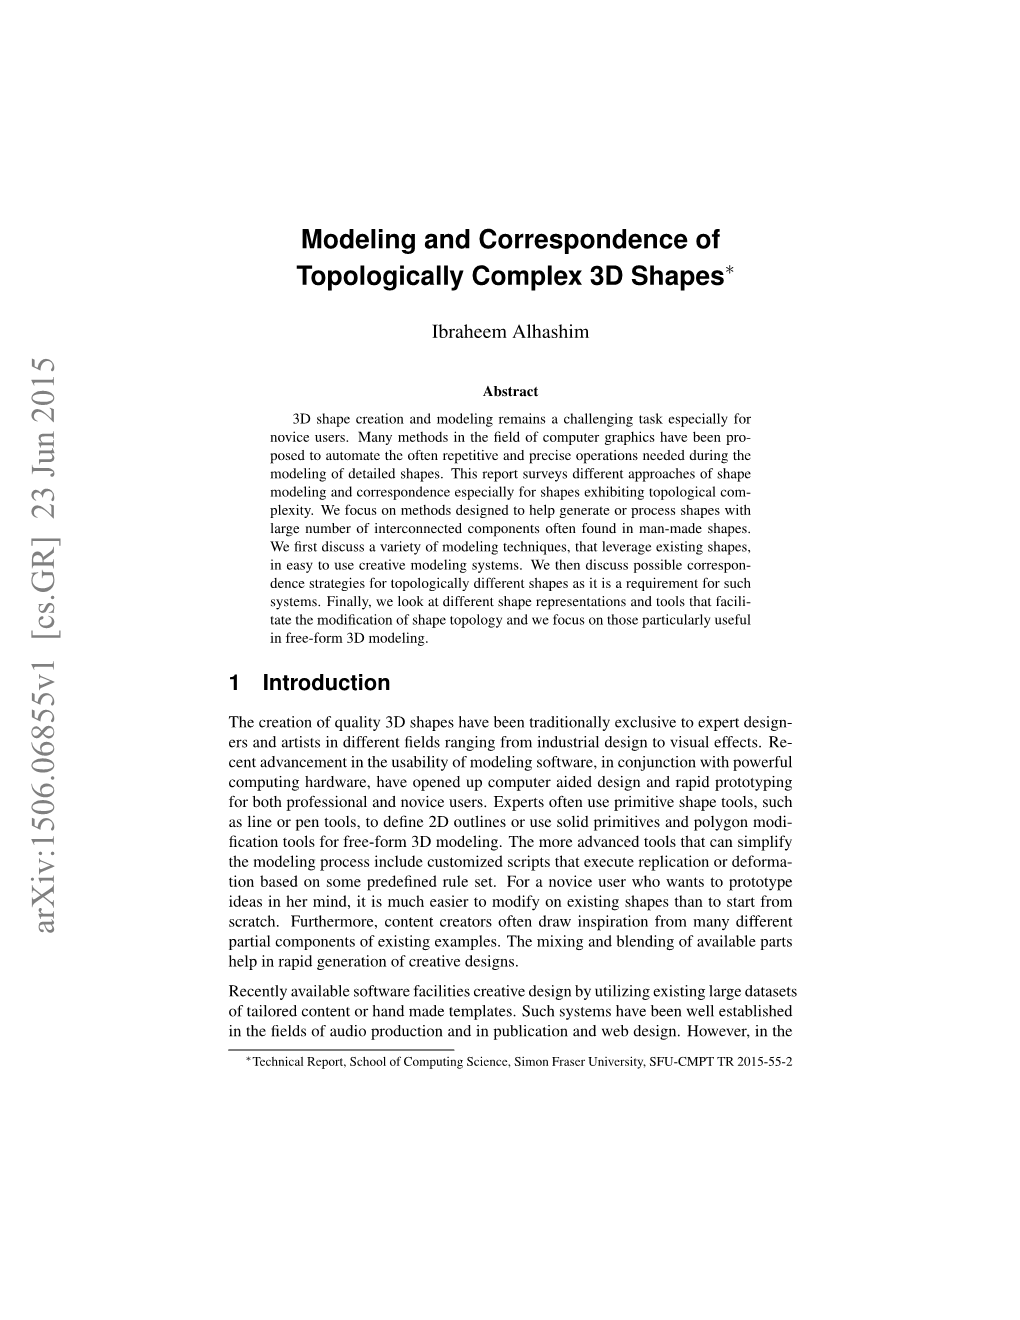 Modeling and Correspondence of Topologically Complex 3D Shapes∗